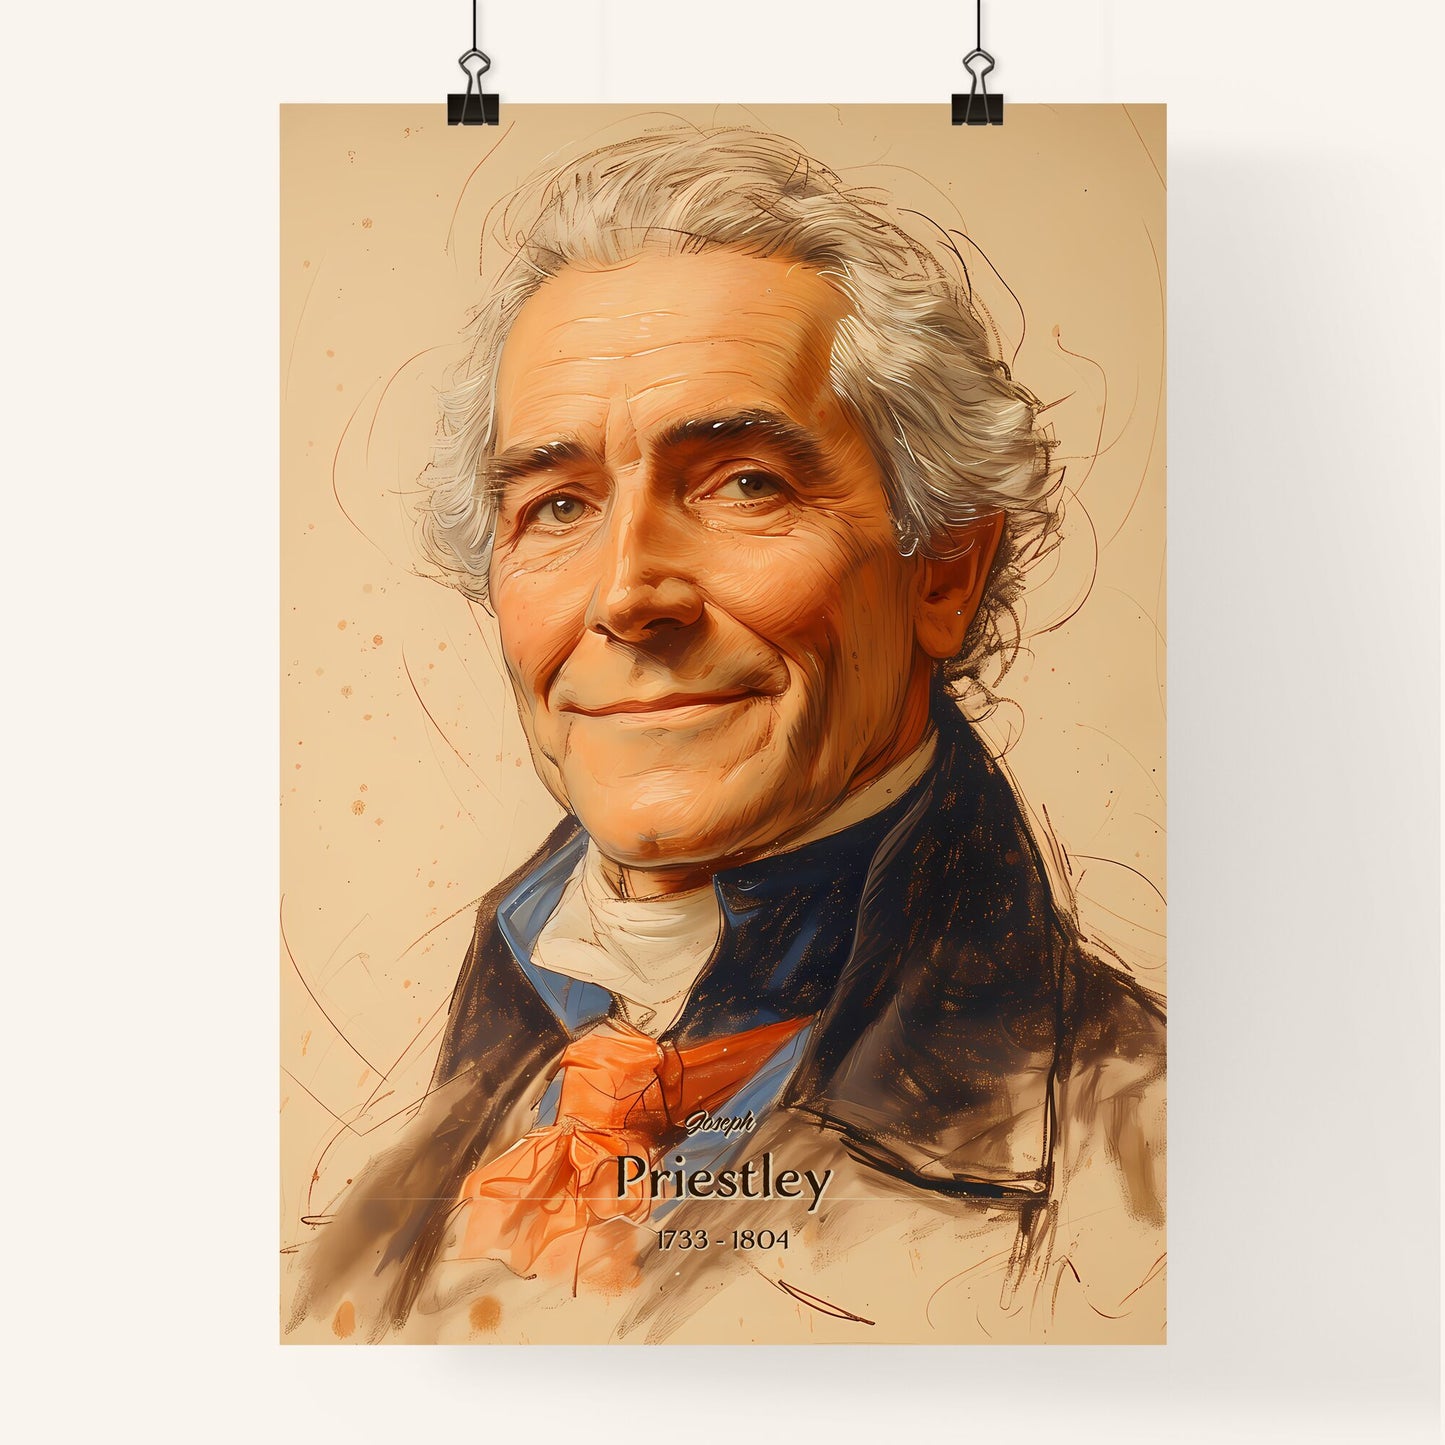 Joseph, Priestley, 1733 - 1804, A Poster of a man with white hair and a red tie Default Title